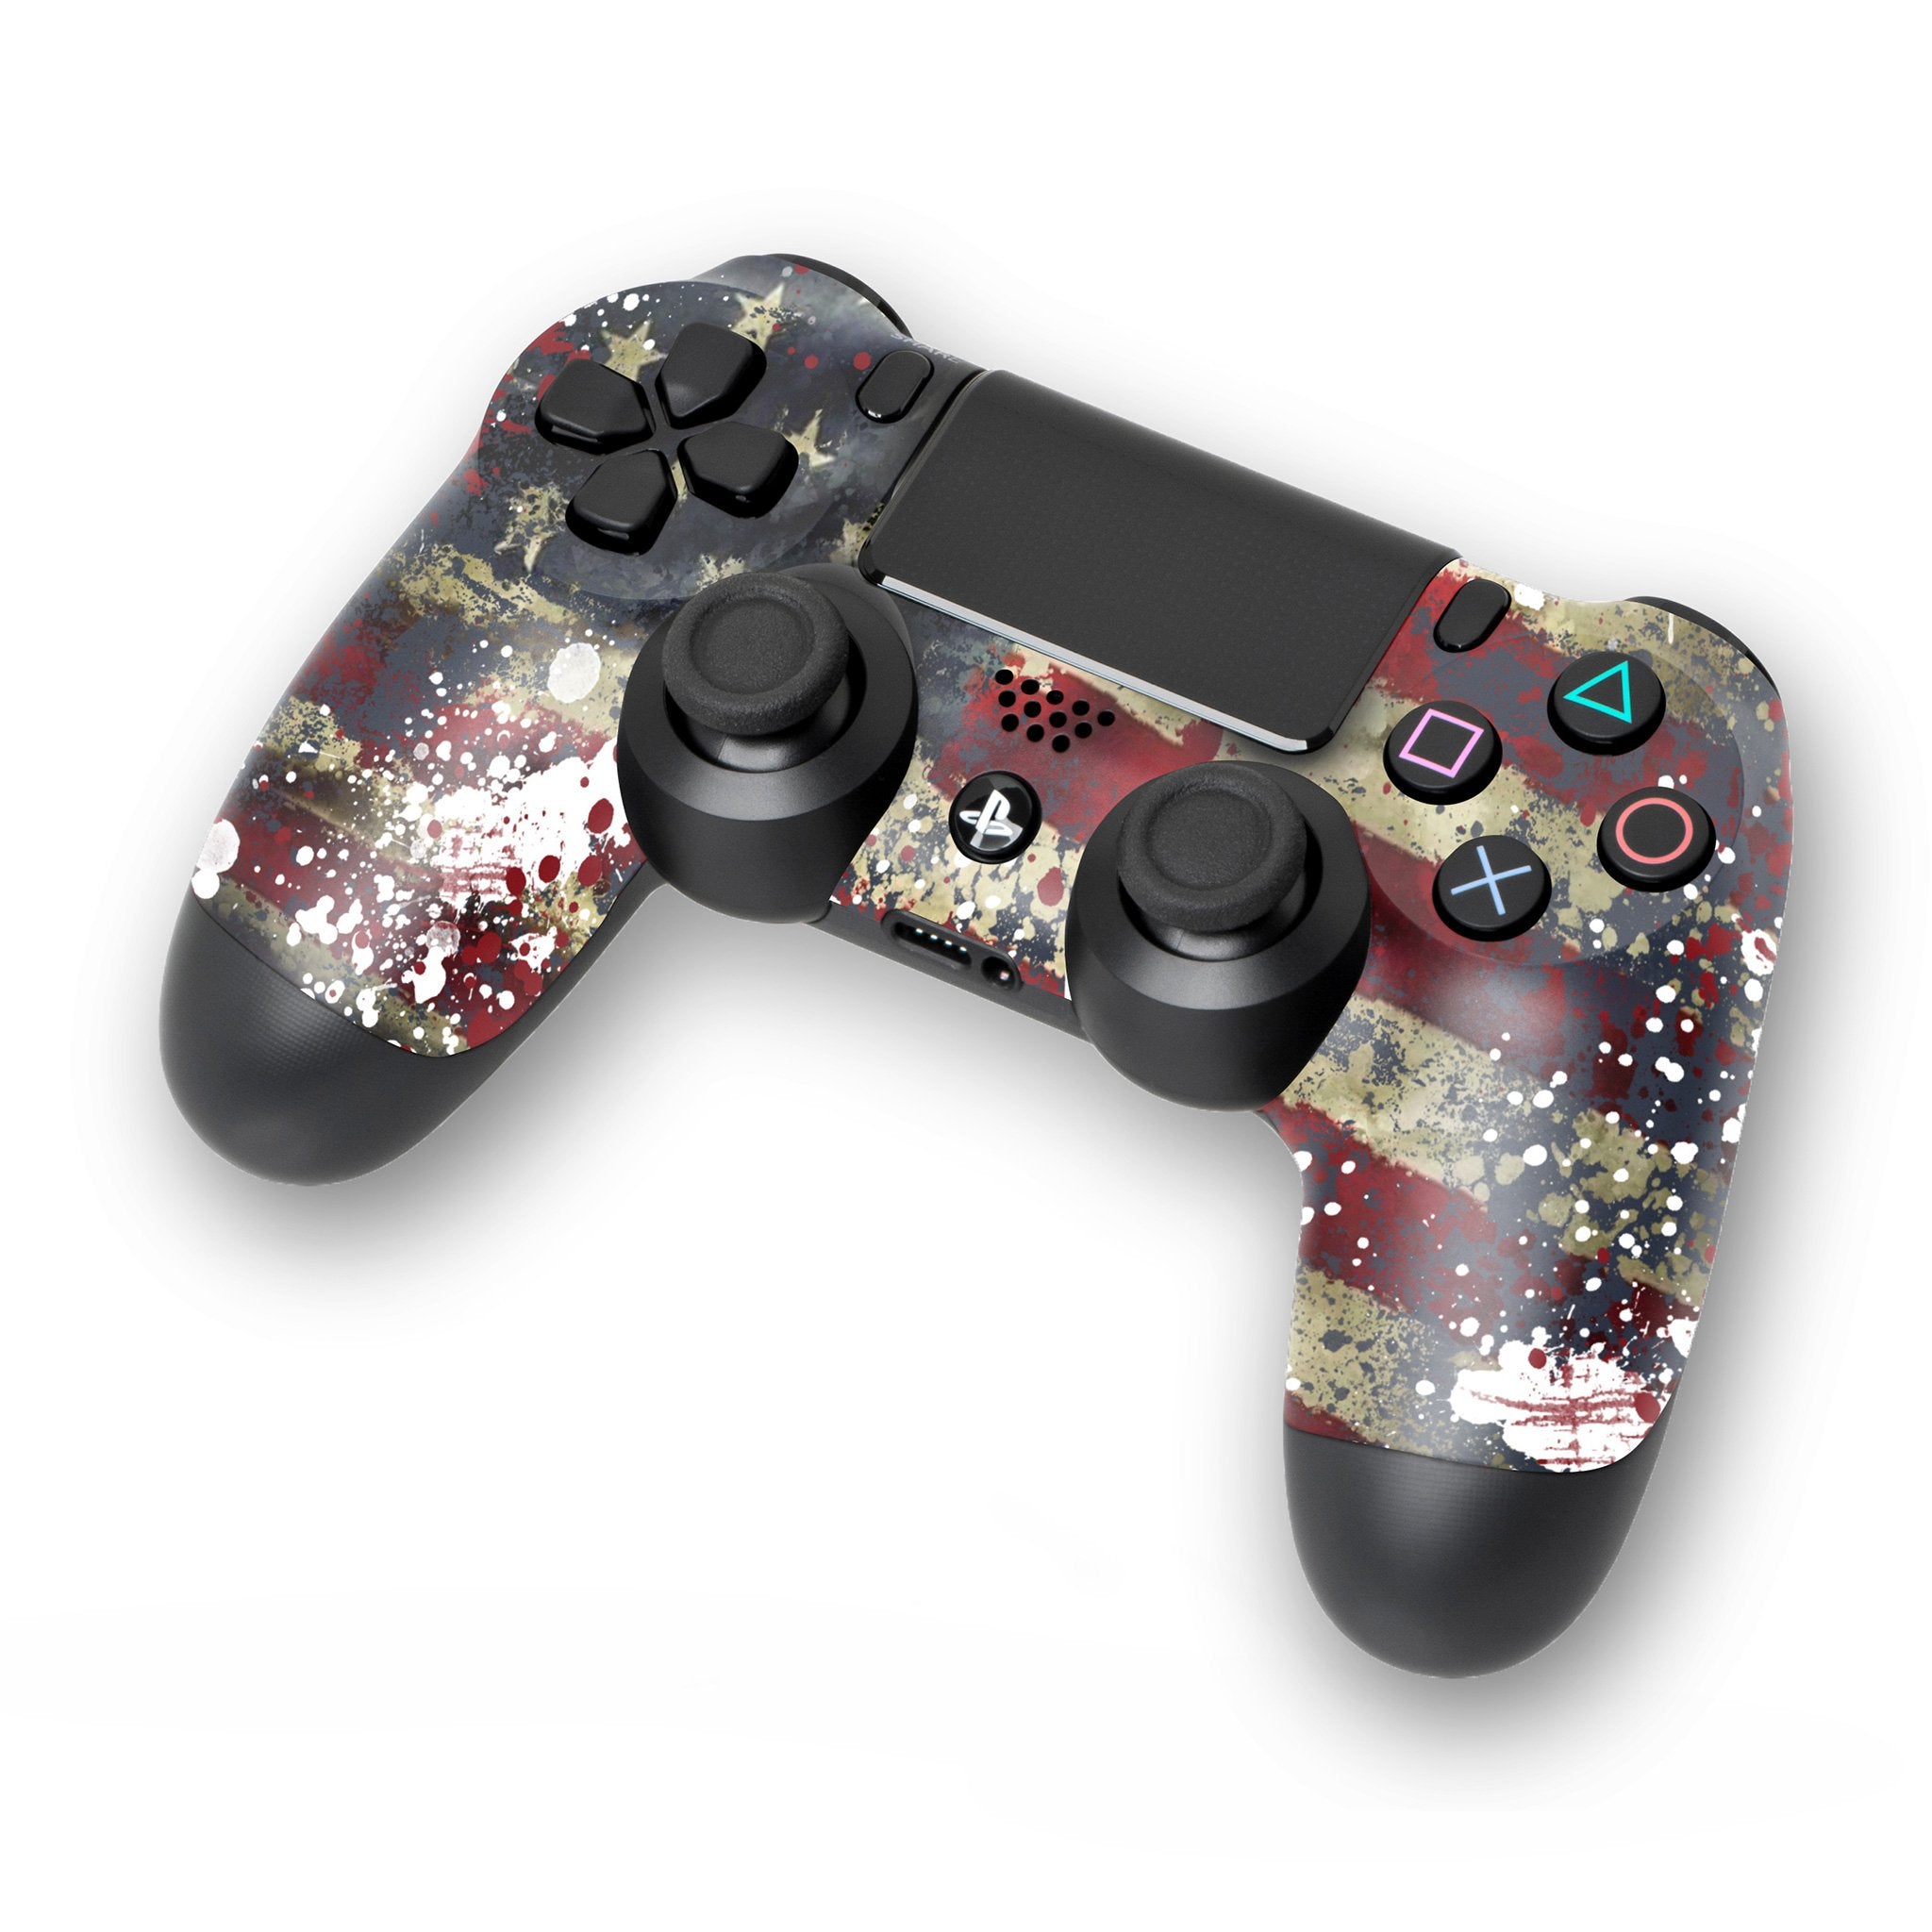 Tattered Flag Ps4 Custom Controller Exclusive